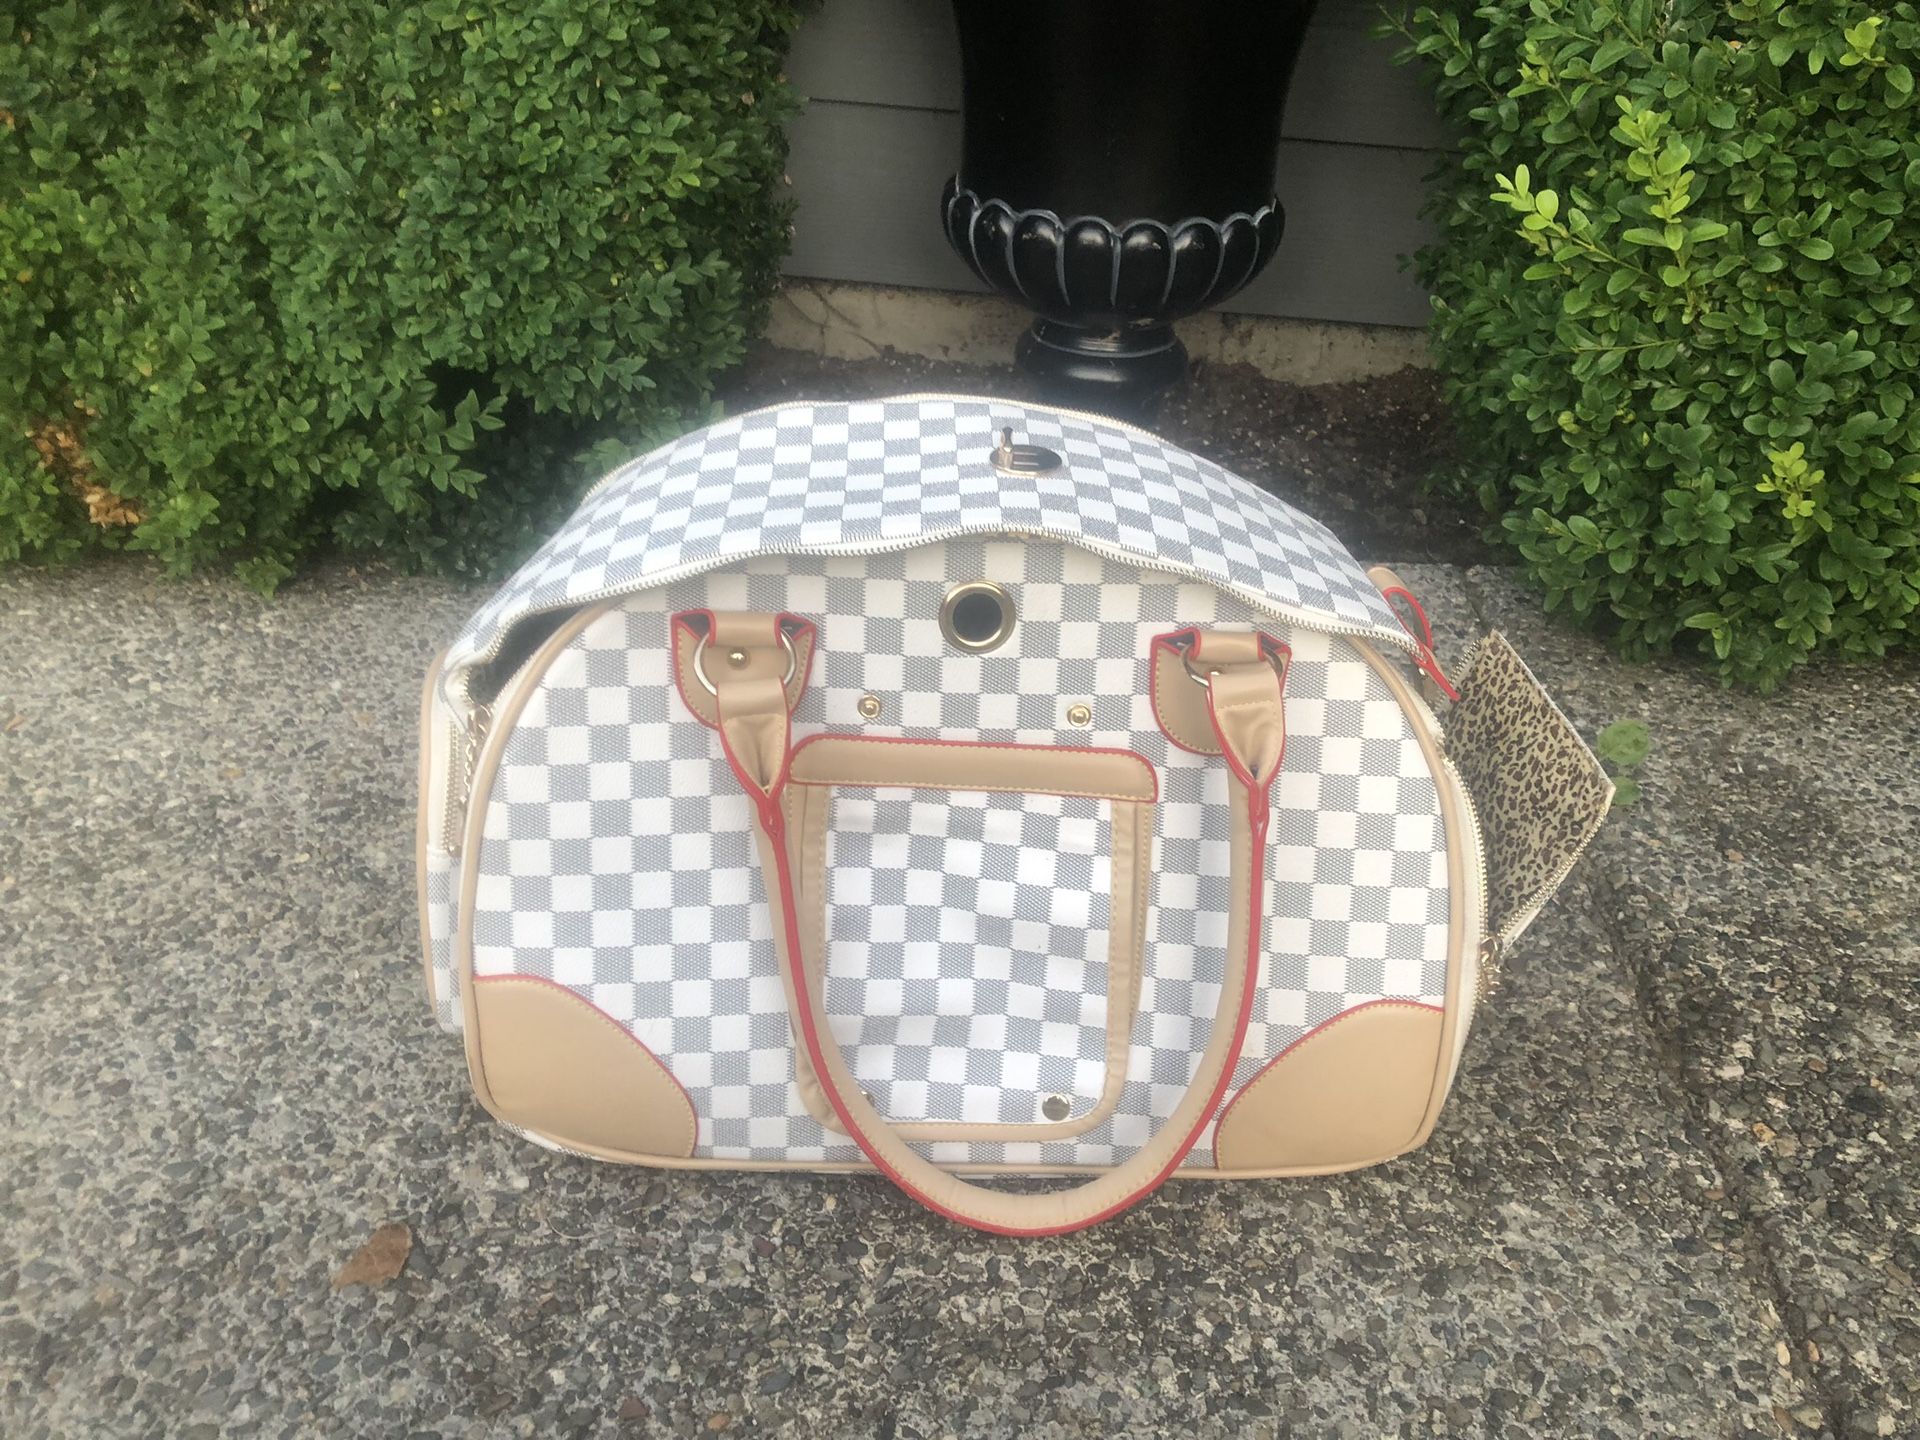 Very nice checkered small dog/ cat carrier